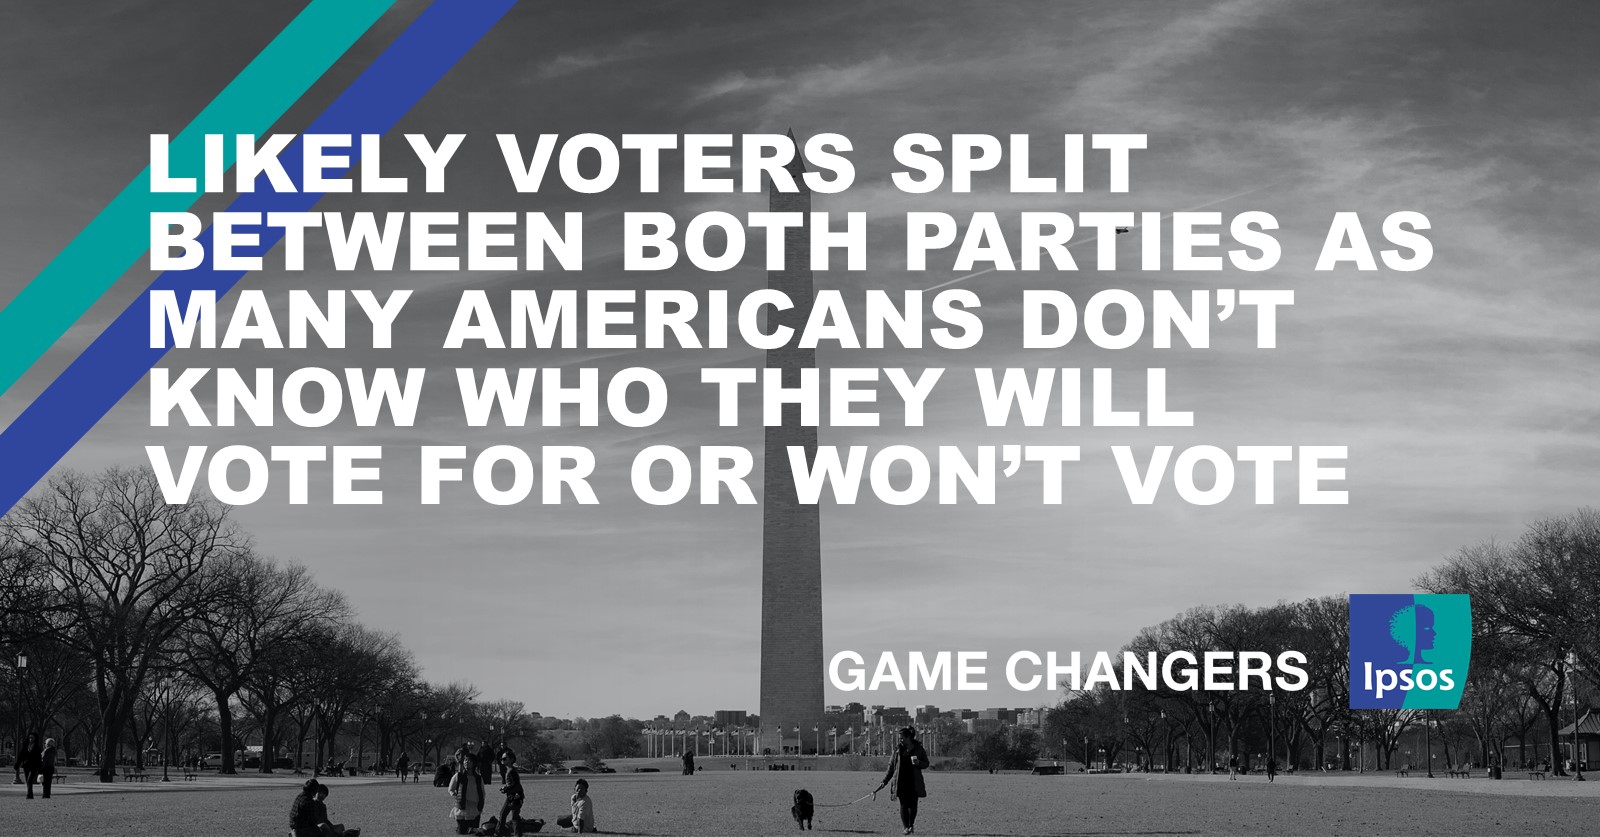 Likely voters split between both parties as many Americans don't know who  they will vote for or won't vote